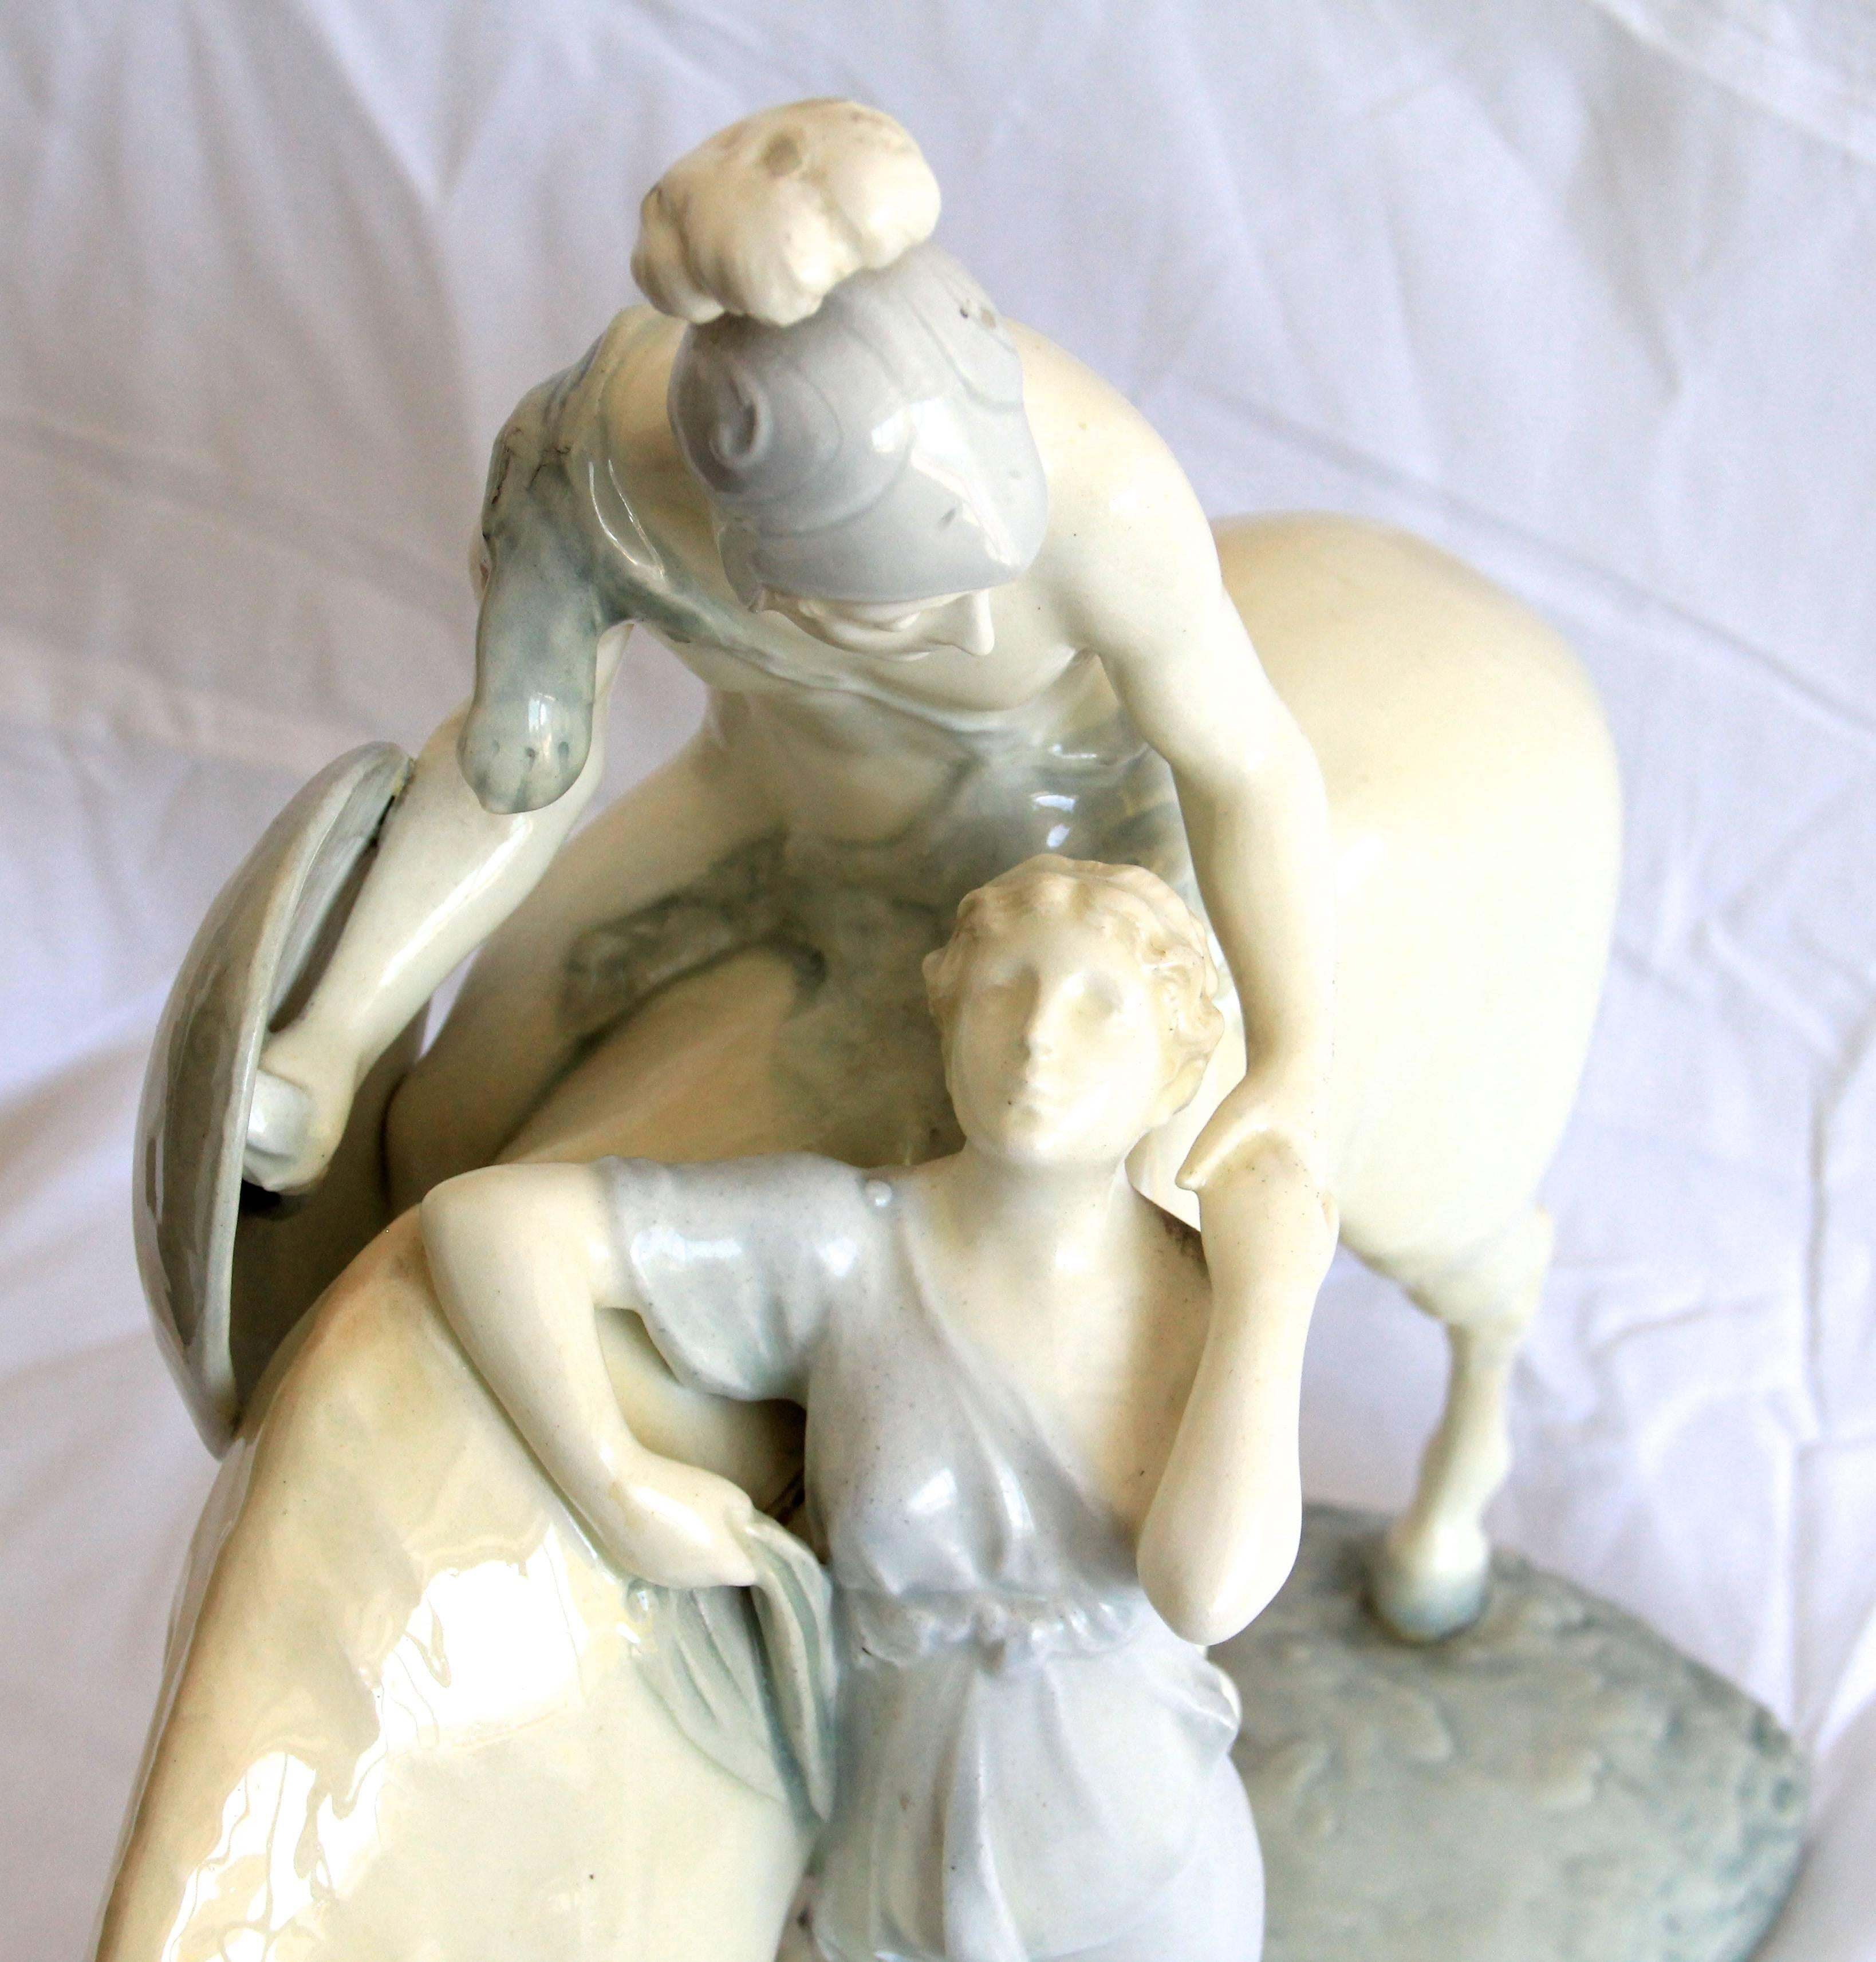 This very nice porcelain figure from Royal Vienna Porcelain Austria, circa 1905 shows an antique soldier on a horse with his maiden. This exceptional piece was designed by Ernst Wahliss and is in a very good condition and bookmarked with the Royal